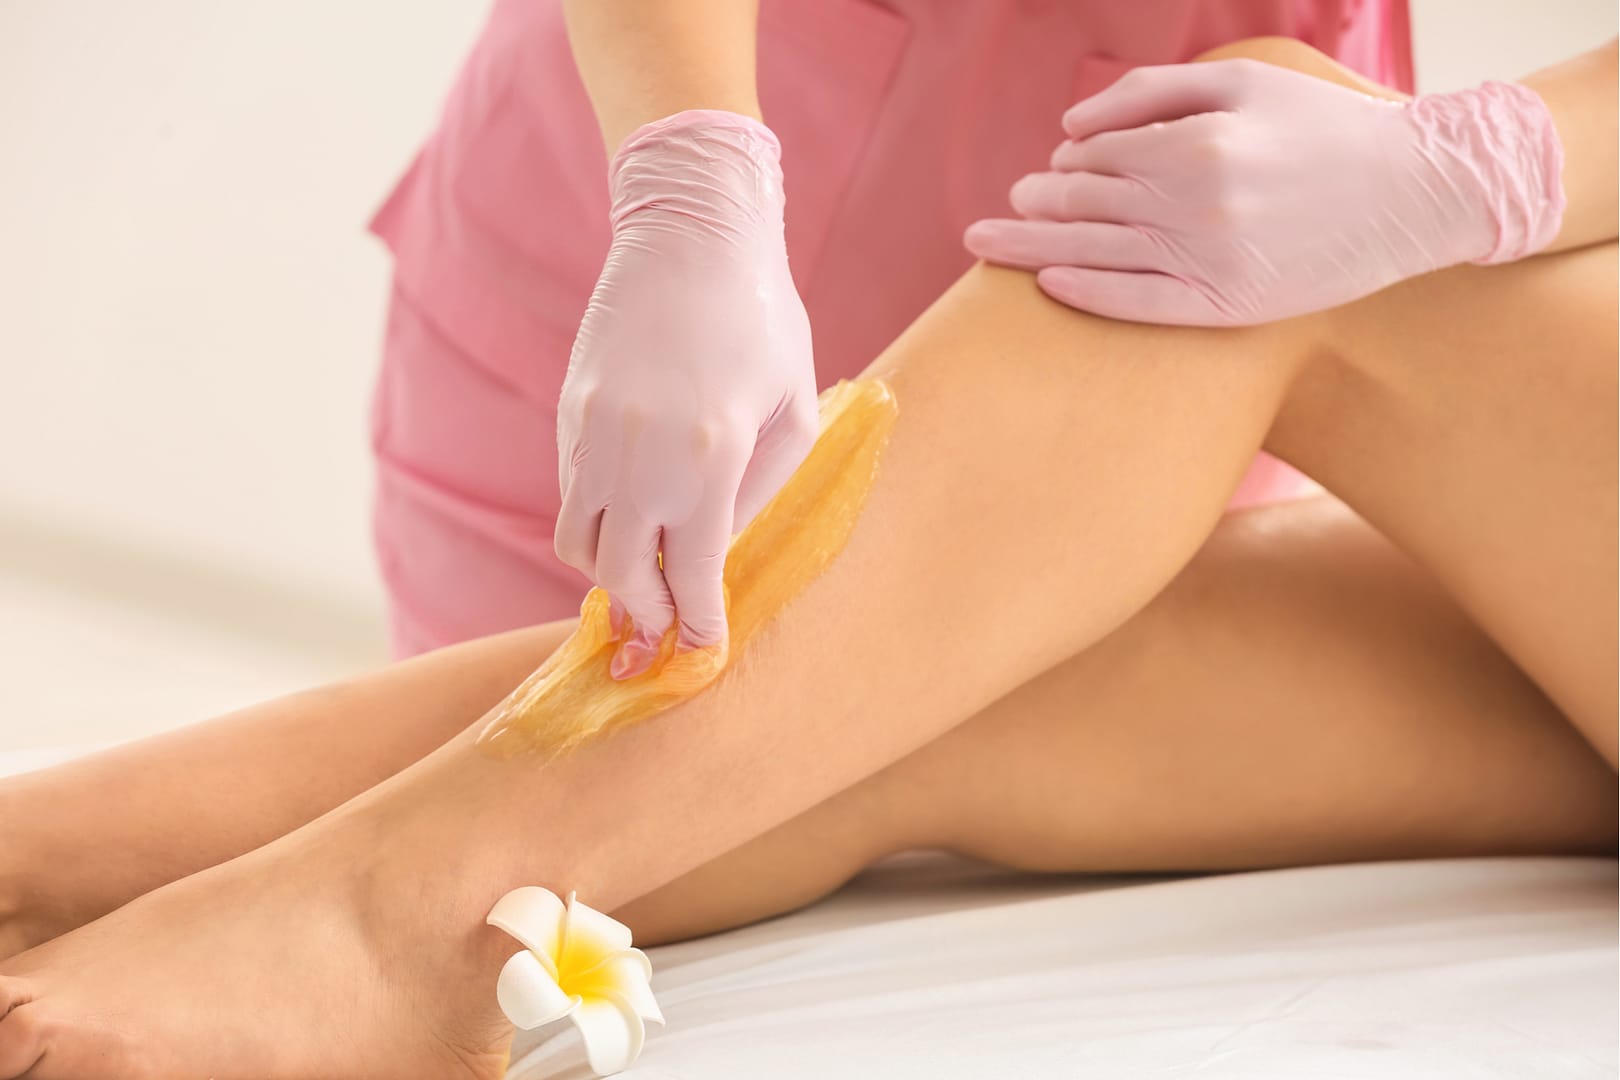 A lady getting her legs professionally waxed